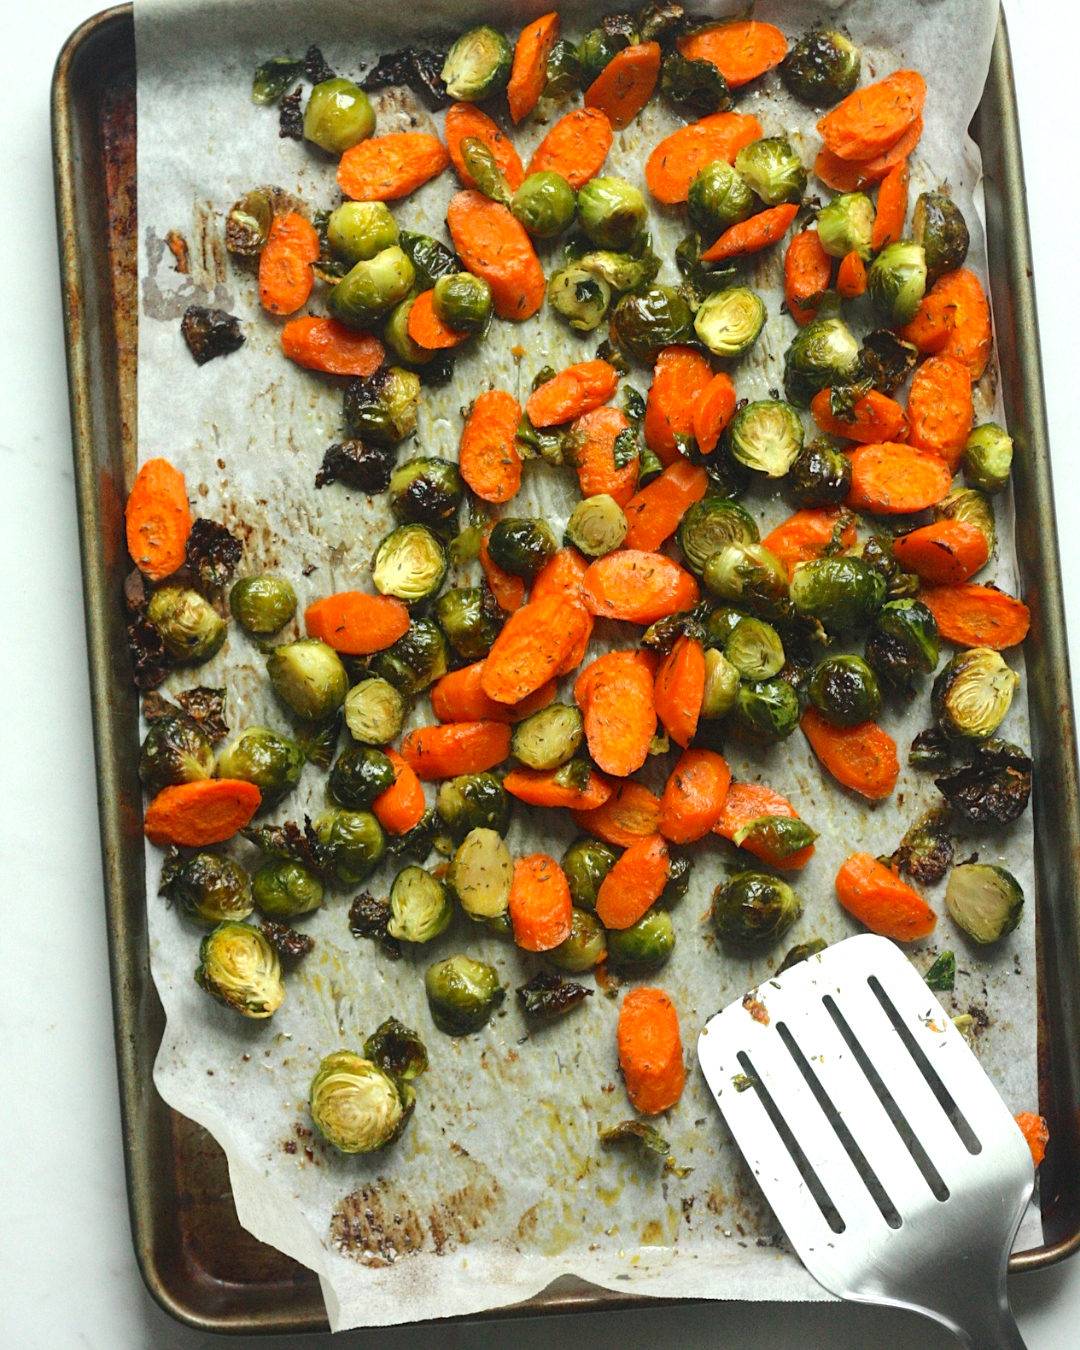 Sweet & Savory Roasted Carrots and Brussels Sprouts